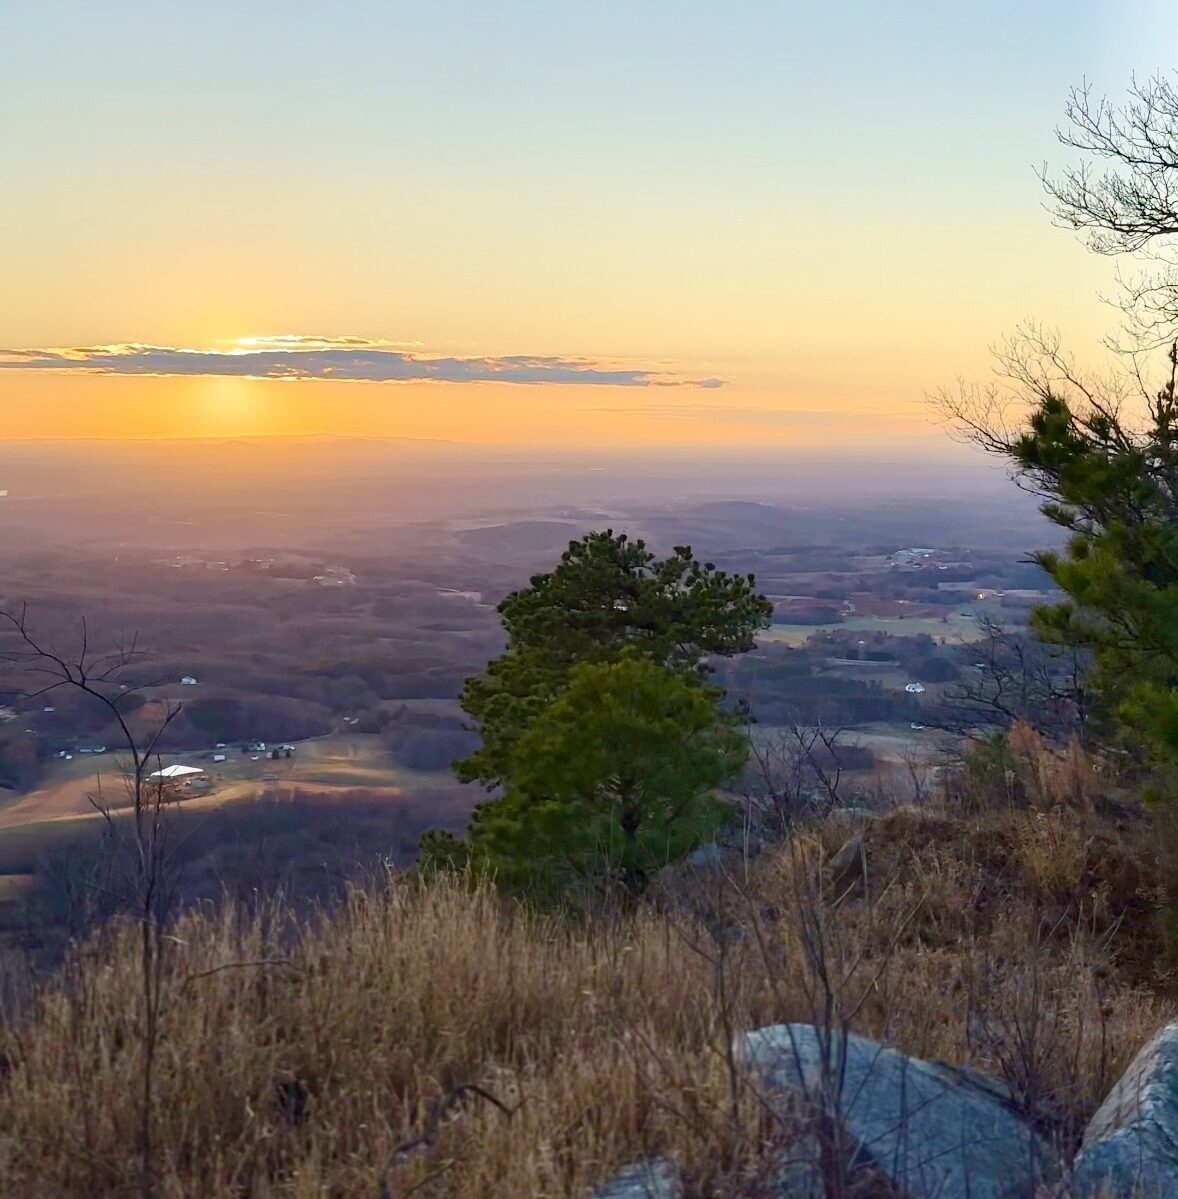 A captivating sunset at the overlook on Pilot Mountain, where the sky blazes with brilliant shades of orange and pink, illuminating the majestic landscape and the distinctive peak of the mountain.